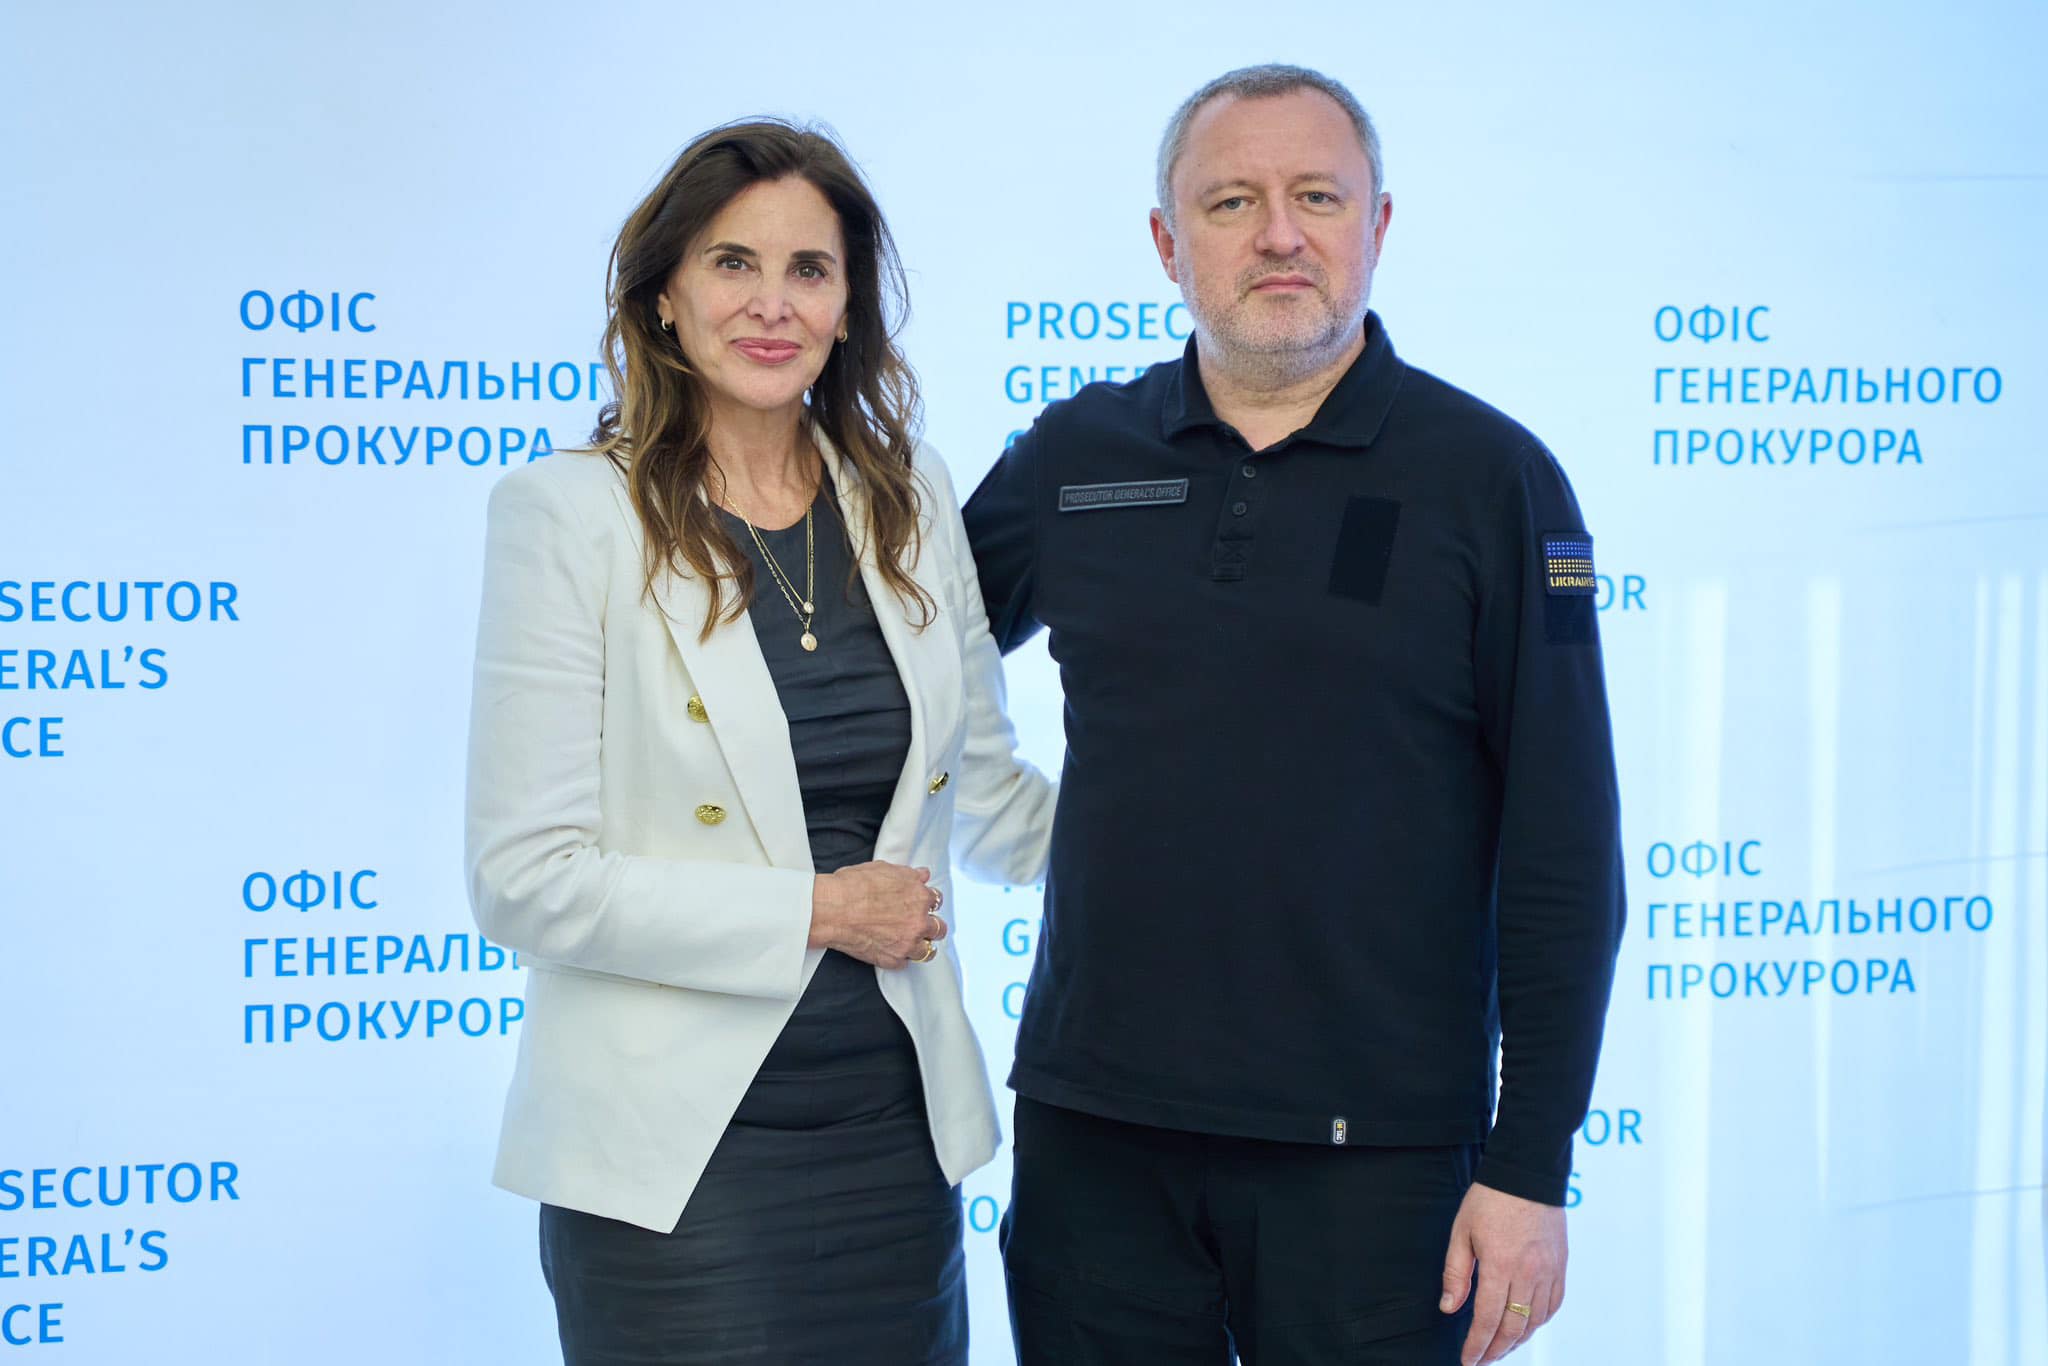 The Prosecutor General's Office and The Reckoning Project will collaborate on gathering evidence of Russian war crimes